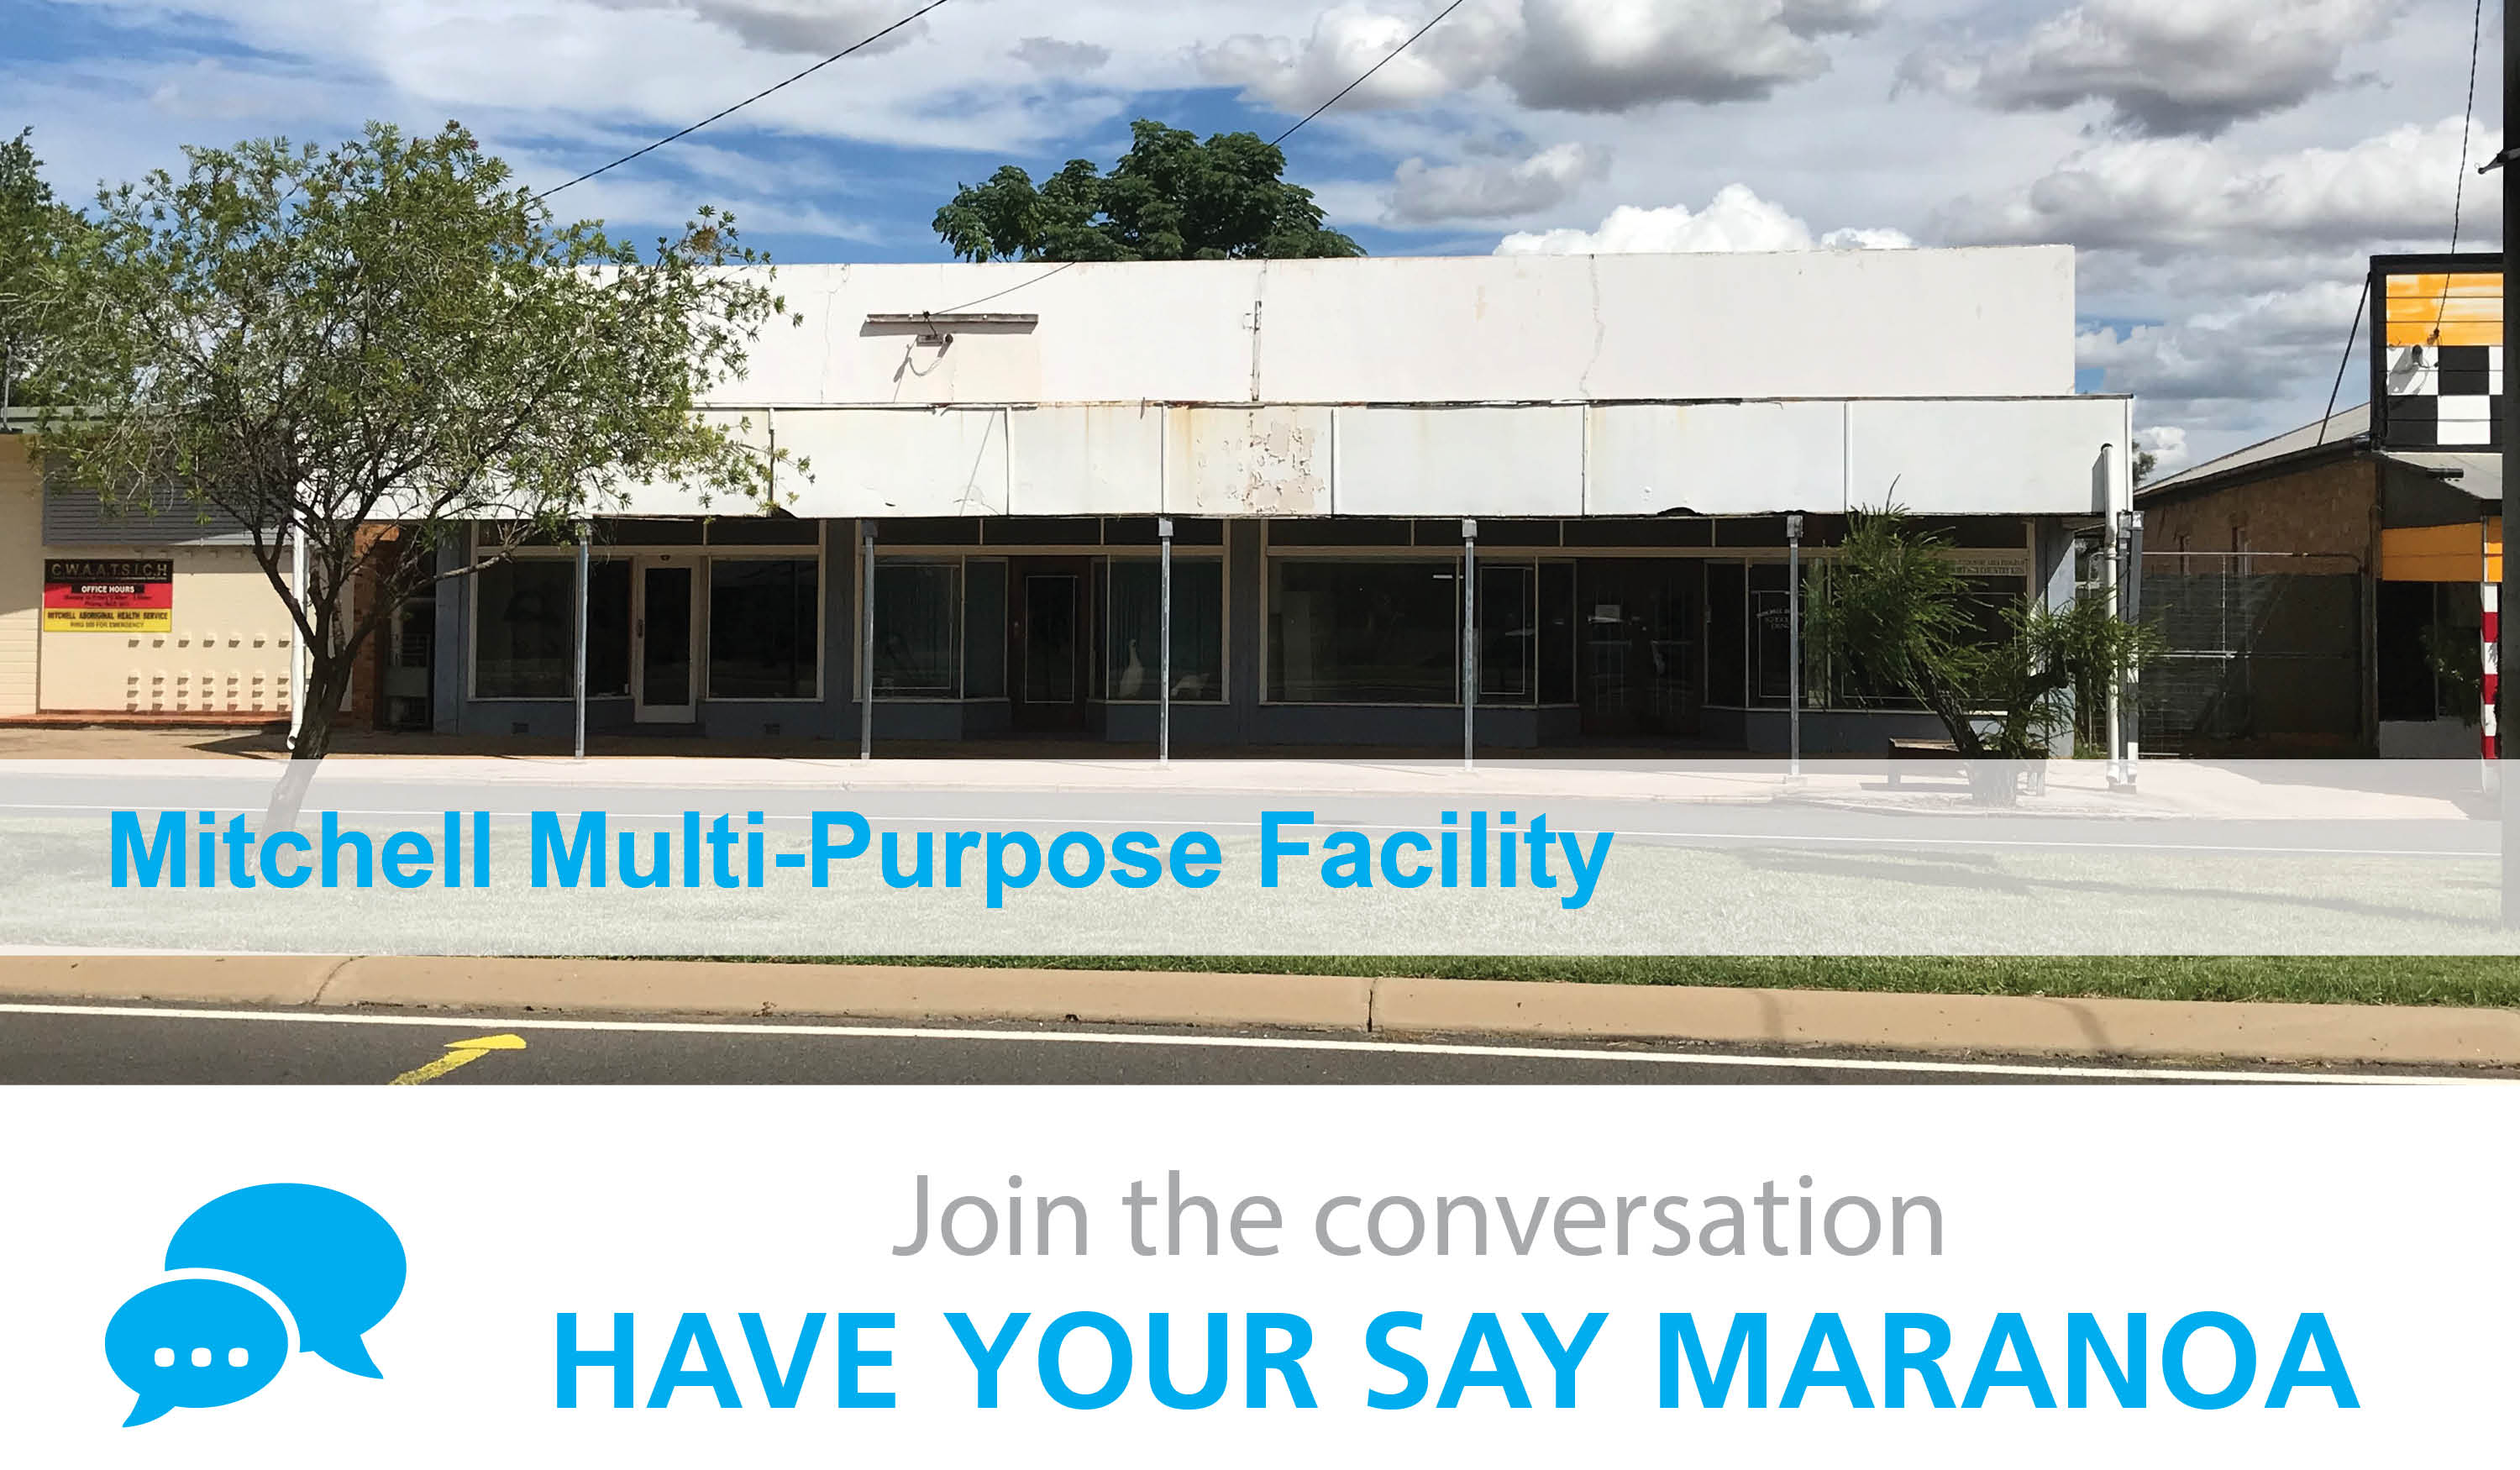 Have your say mitchell multi purpose facility